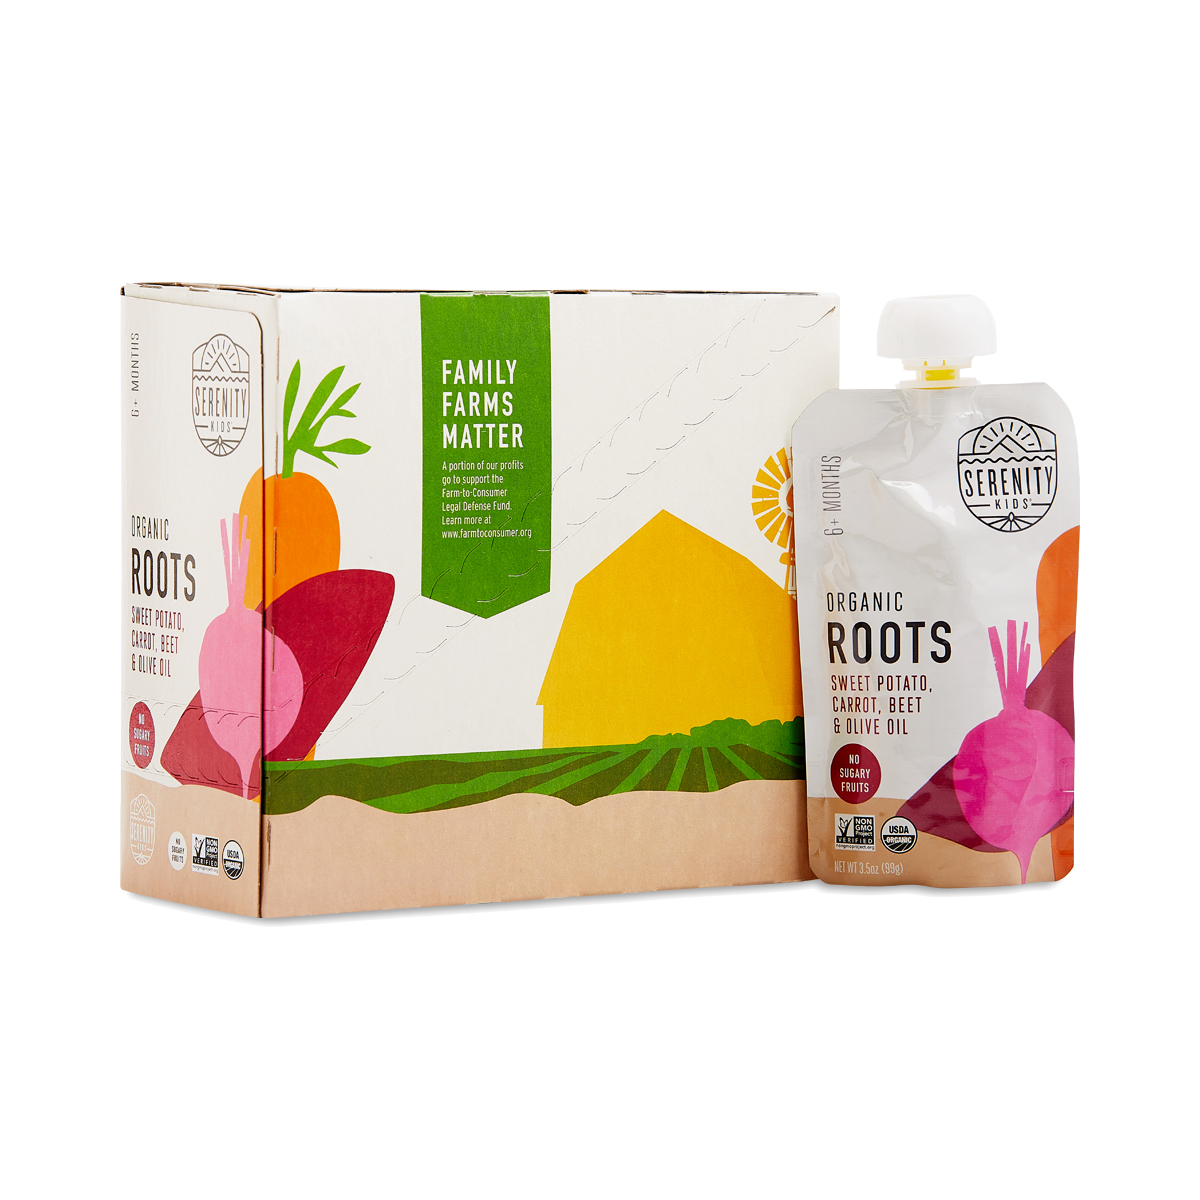 Serenity Kids Organic Roots with Sweet Potato, Carrot, Beet, and Olive Oil Baby Food 6 pouches (3.5 oz each)